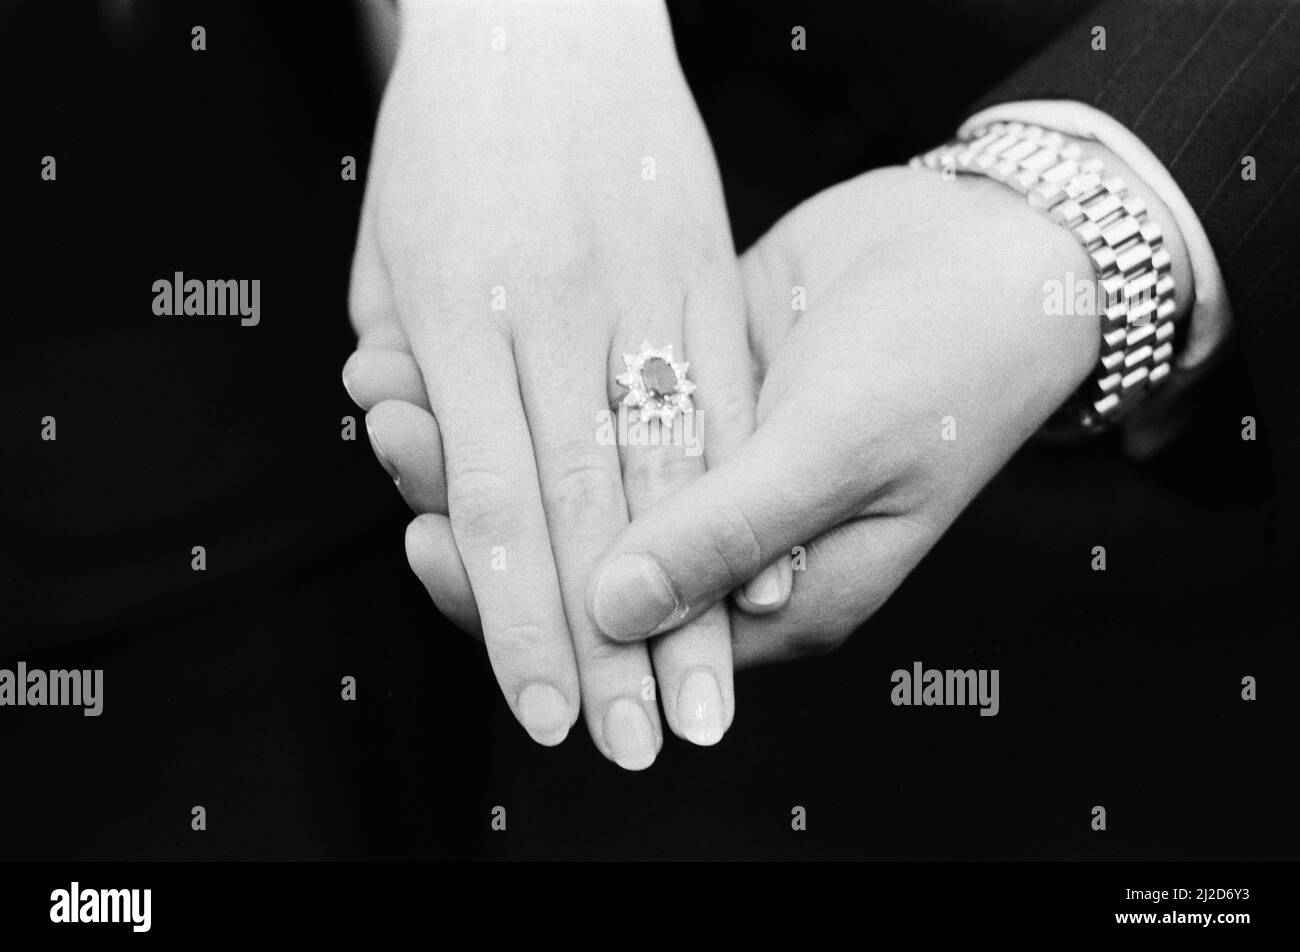 Sarah Ferguson and Prince Andrew announce their engagement at Buckingham Palace, Picture shows Sarah Ferguson's engagement ring, as Andrew holds her hand, taken 19th March 1986 Stock Photo